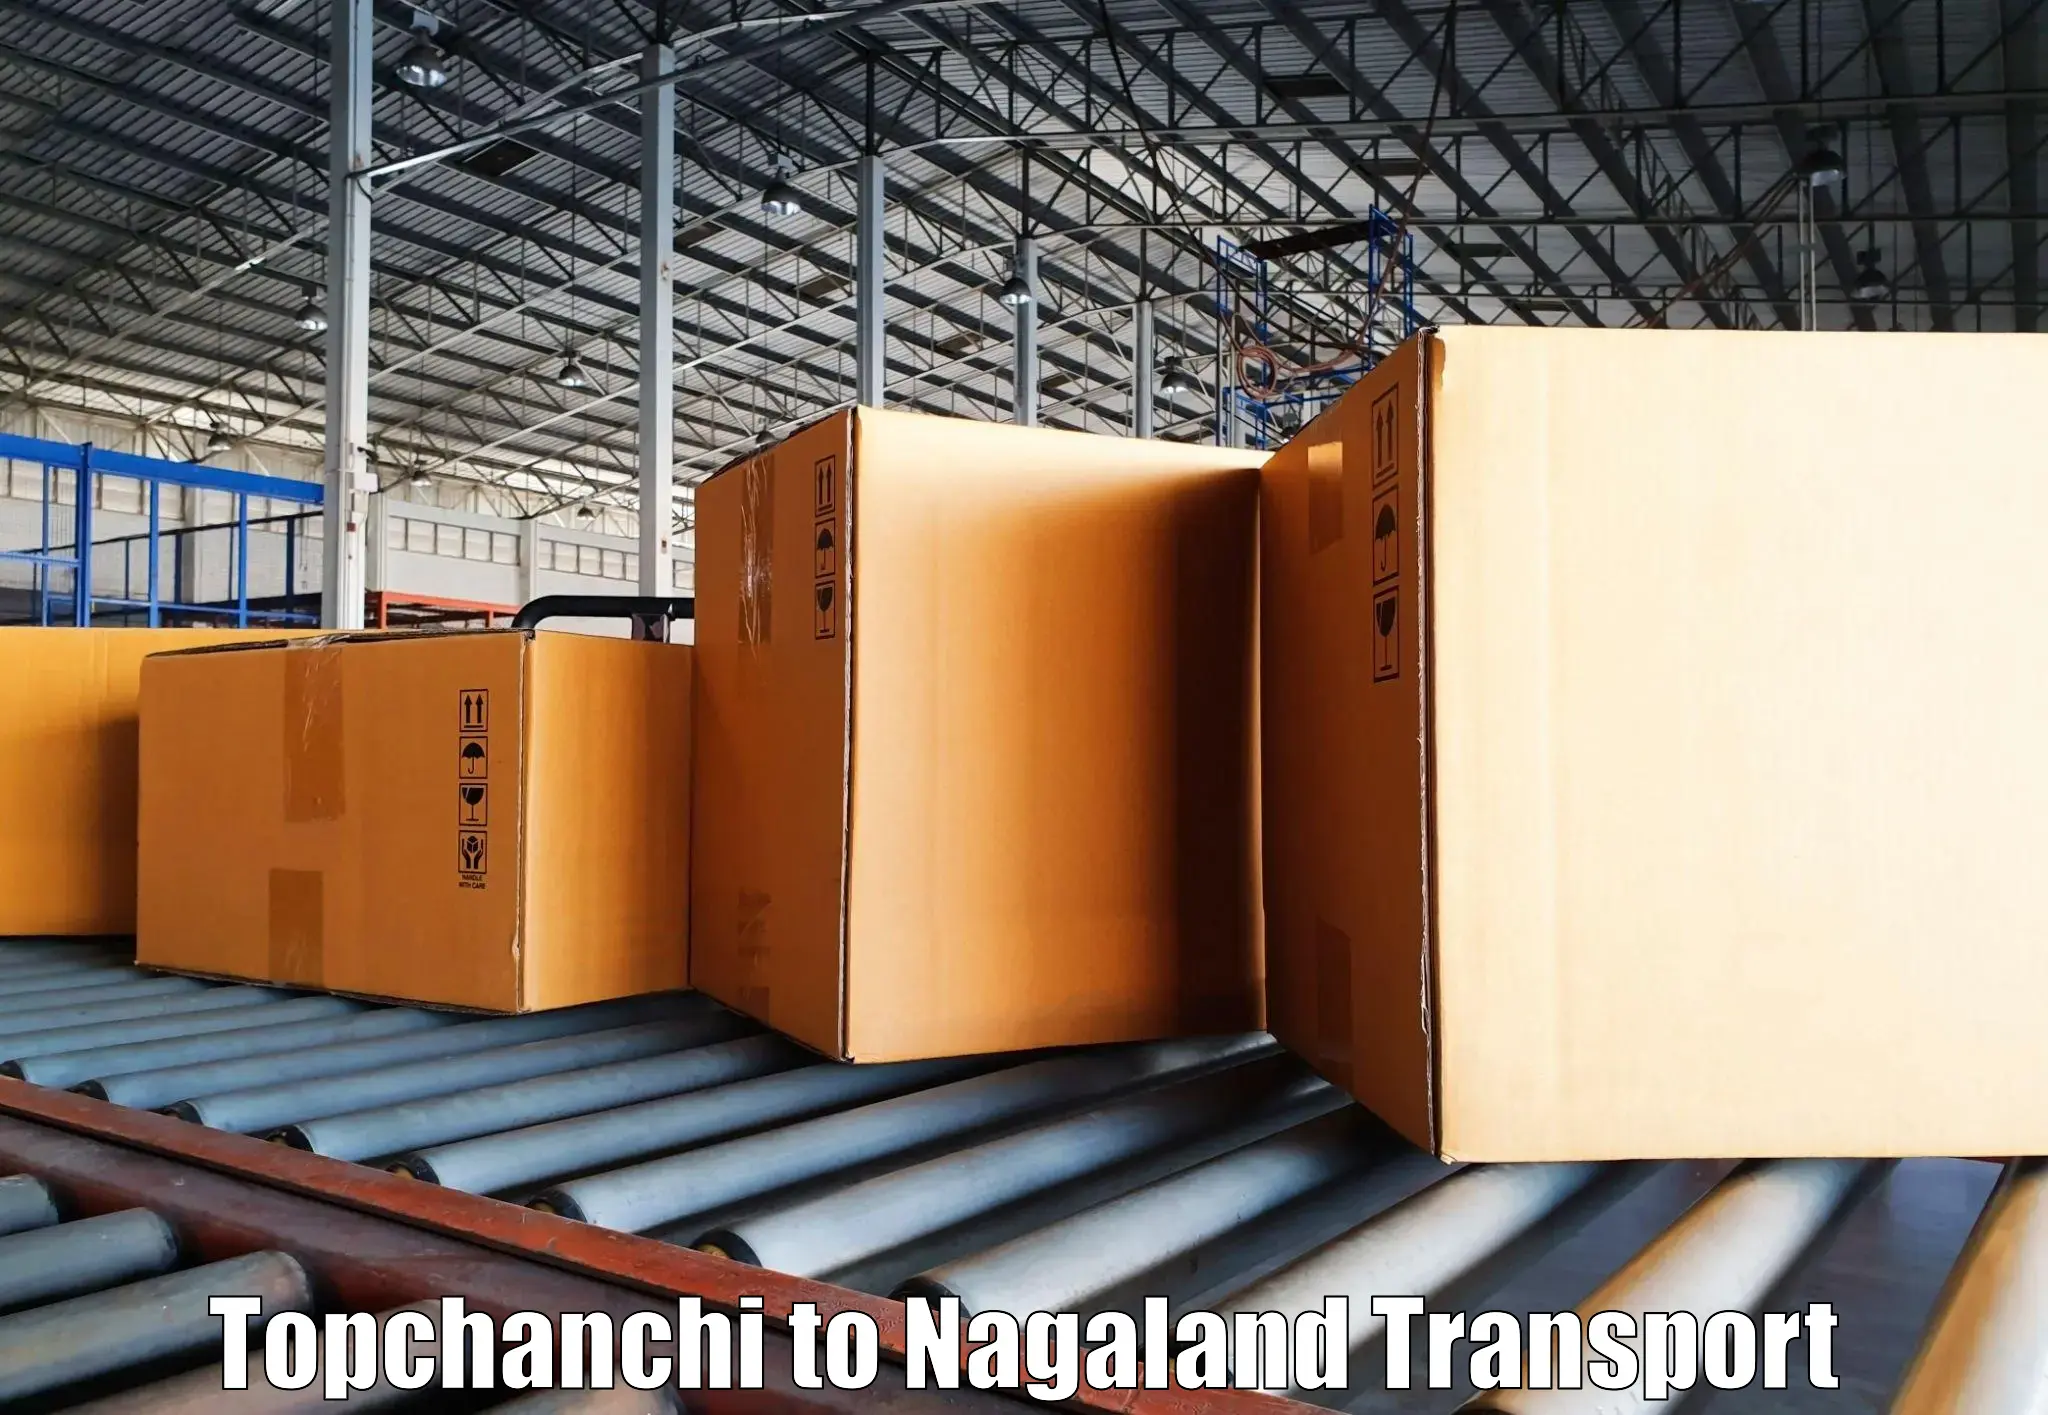 Air freight transport services Topchanchi to Mokokchung